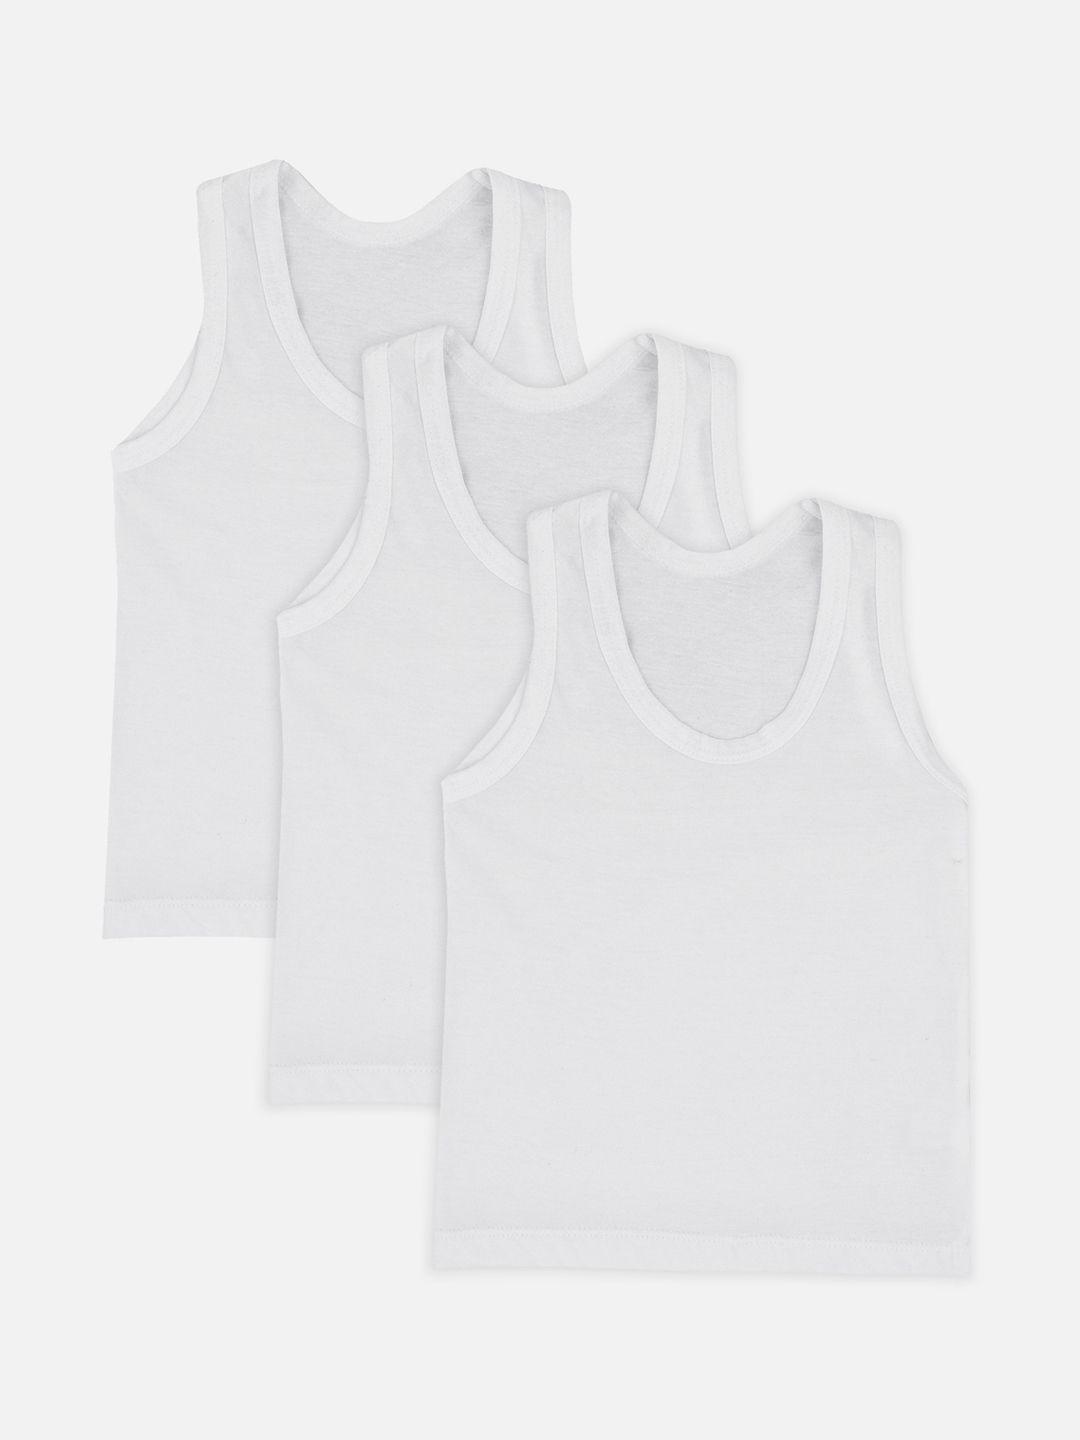 Bodycare Kids Boys Pack Of 3 White Pure Cotton Innerwear Vests